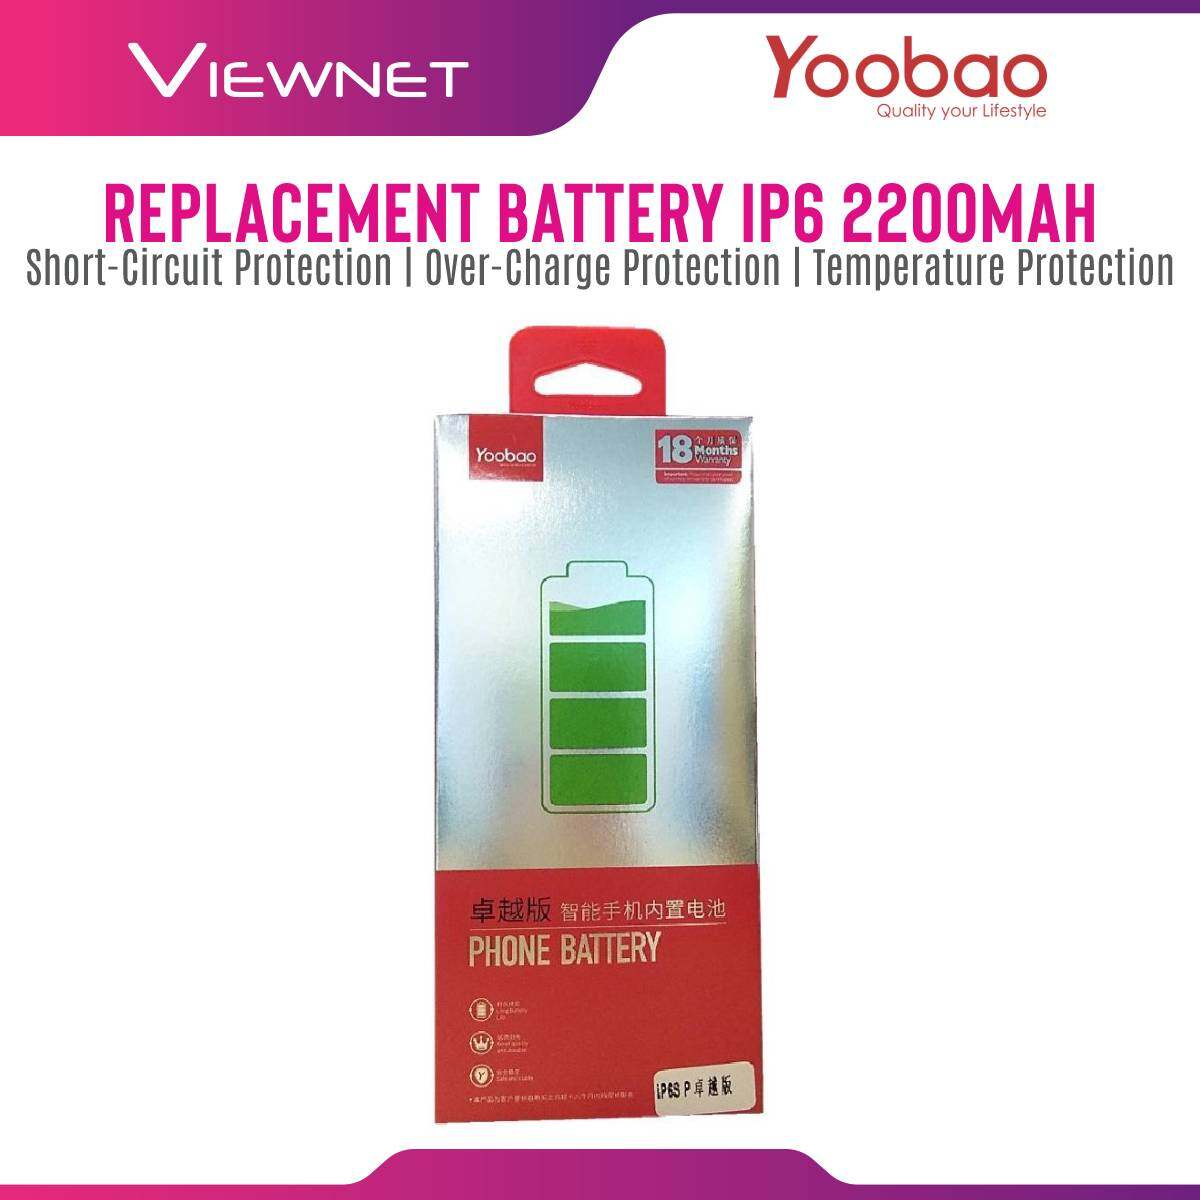 Yoobao 2200mAh ATL Version iPhone 6 Replacement Phone Battery Long Battery Life with 12 Month Warranty